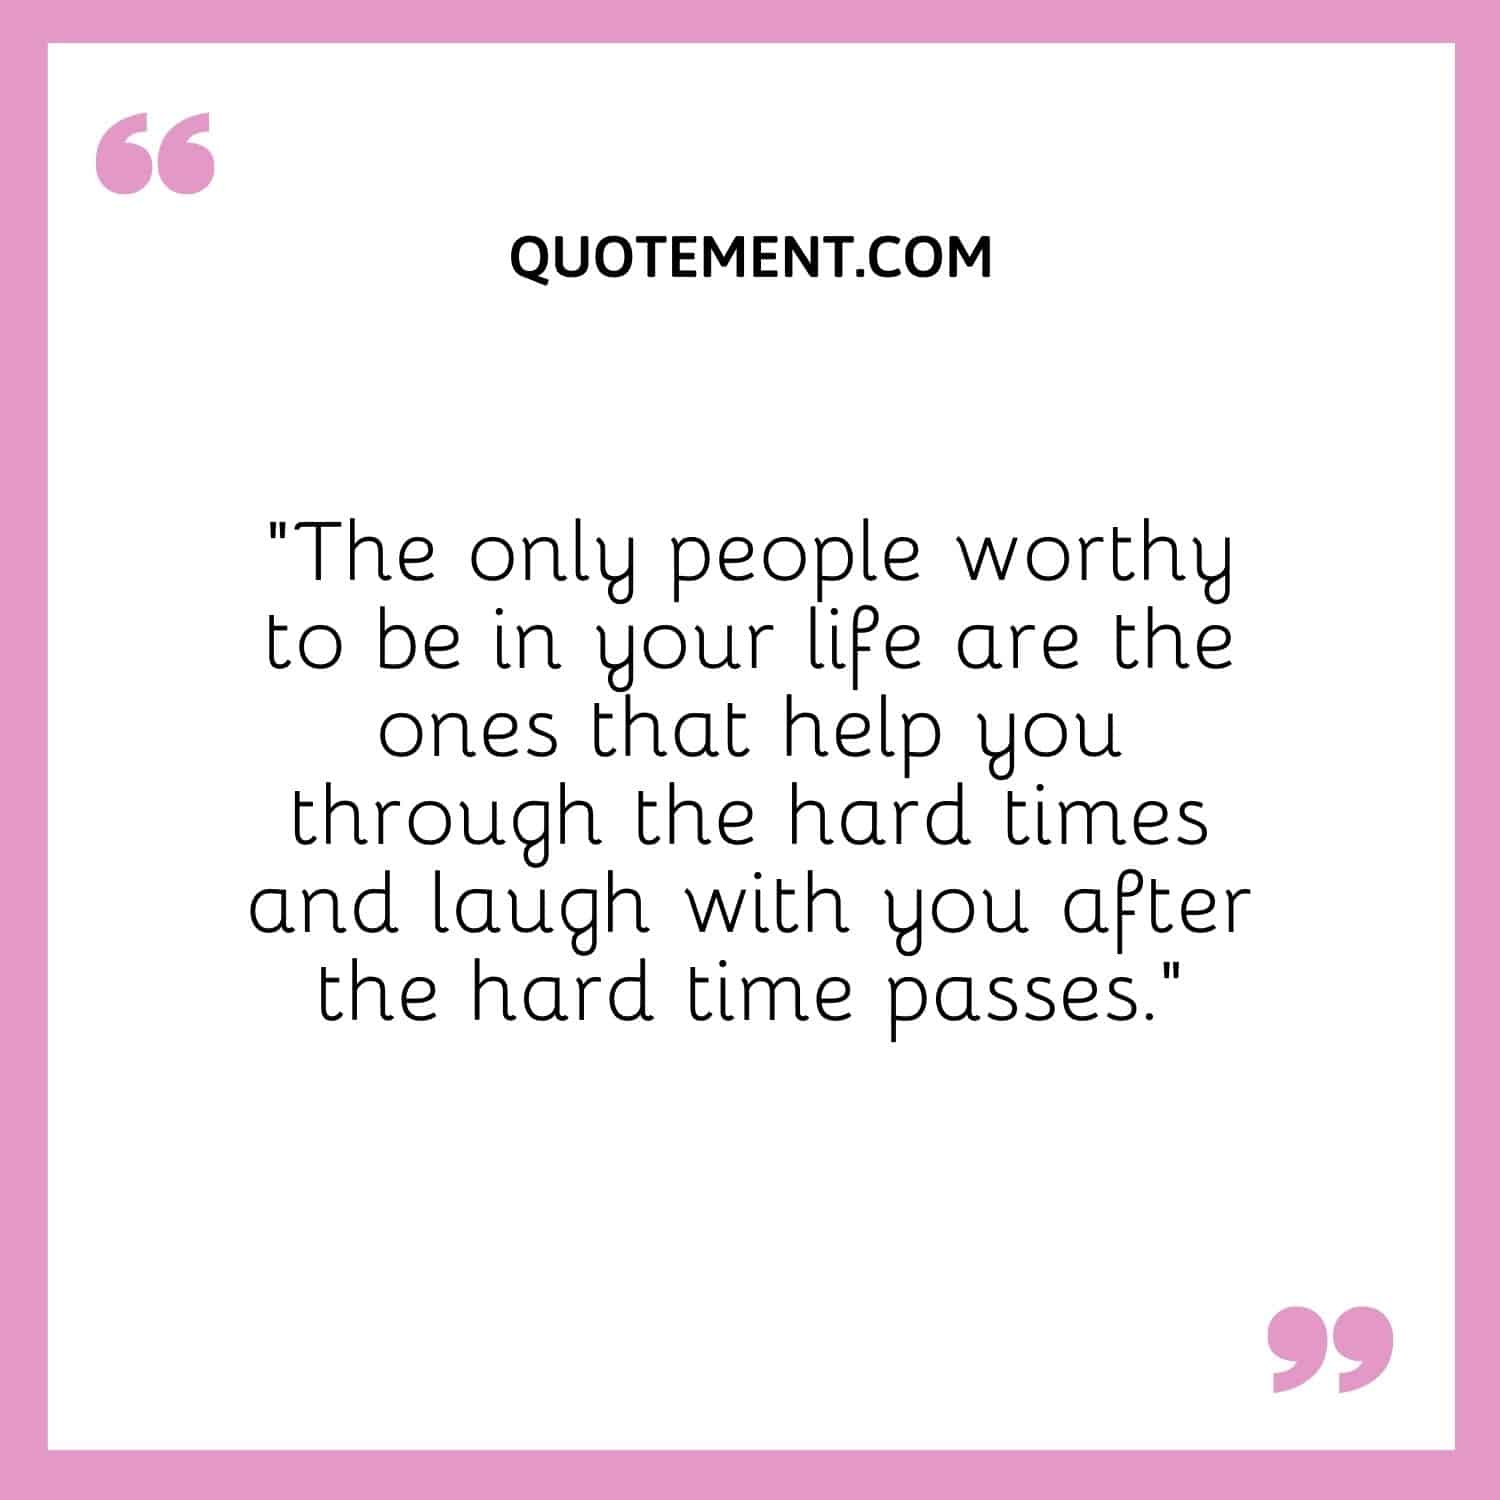 The only people worthy to be in your life are the ones that help you through the hard times and laugh with you after the hard time passes.